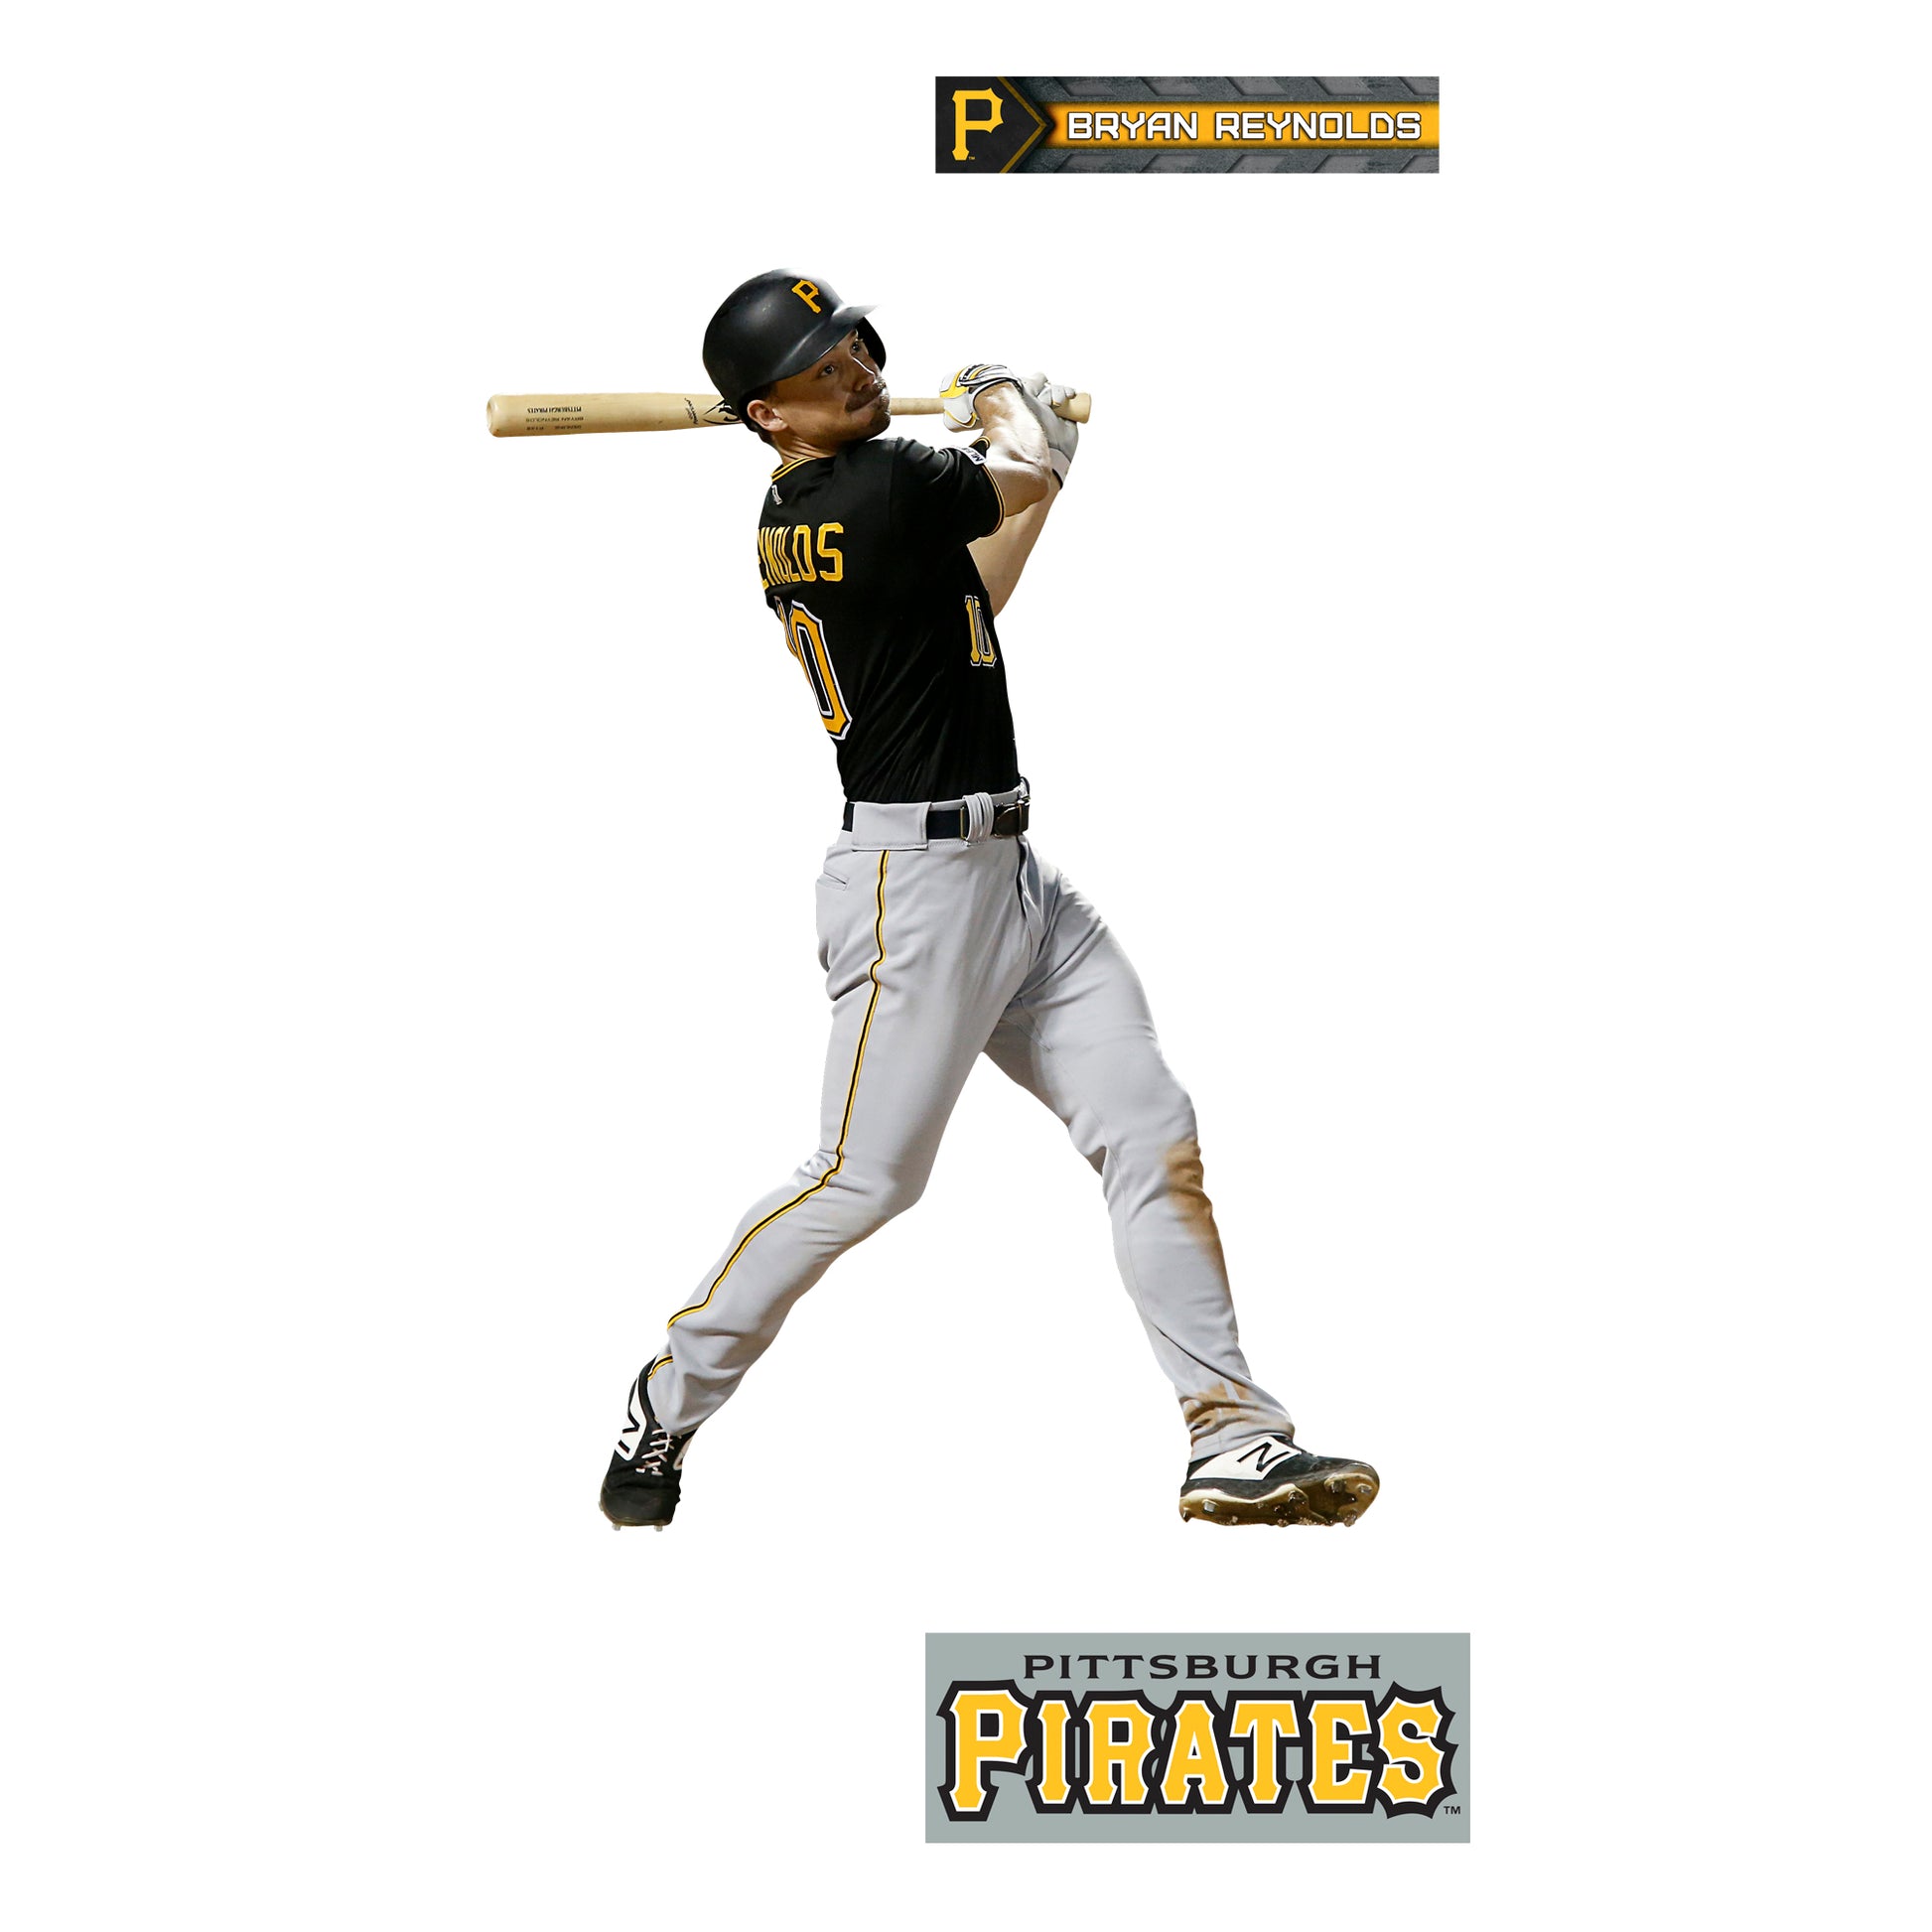 Bryan Reynolds - Officially Licensed MLB Removable Wall Decal – Fathead